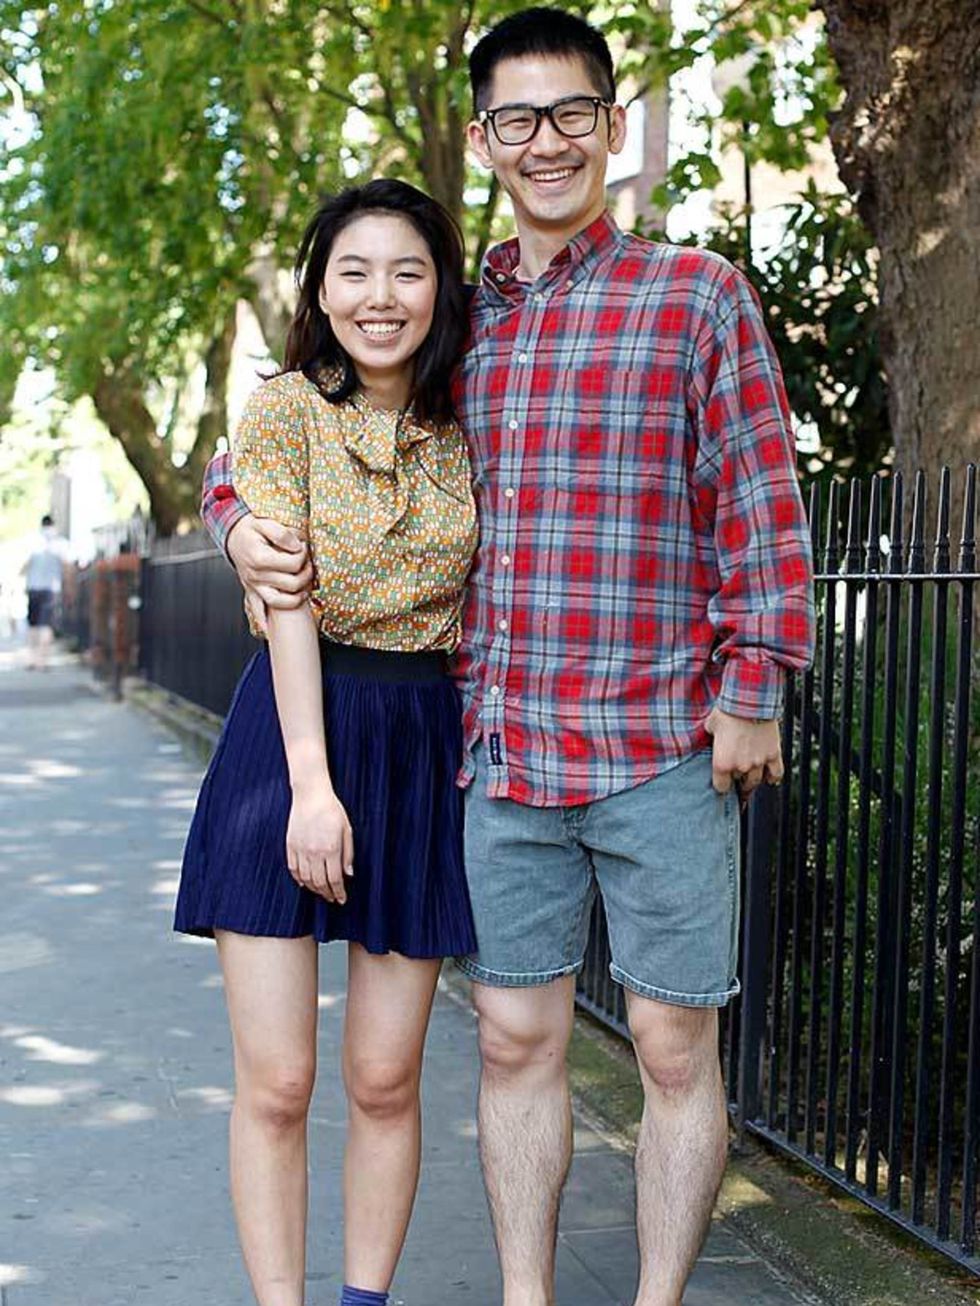 <p>Photo by Silvia Olsen @ Anthea Simms.Jung, 21, Student. Vintage shirt and shoes, skirt from Korea, Dorothy Perkins socks.Don, 28, Student. Beyond Retro shirt and shorts, shoes and glasses from Korea.</p>